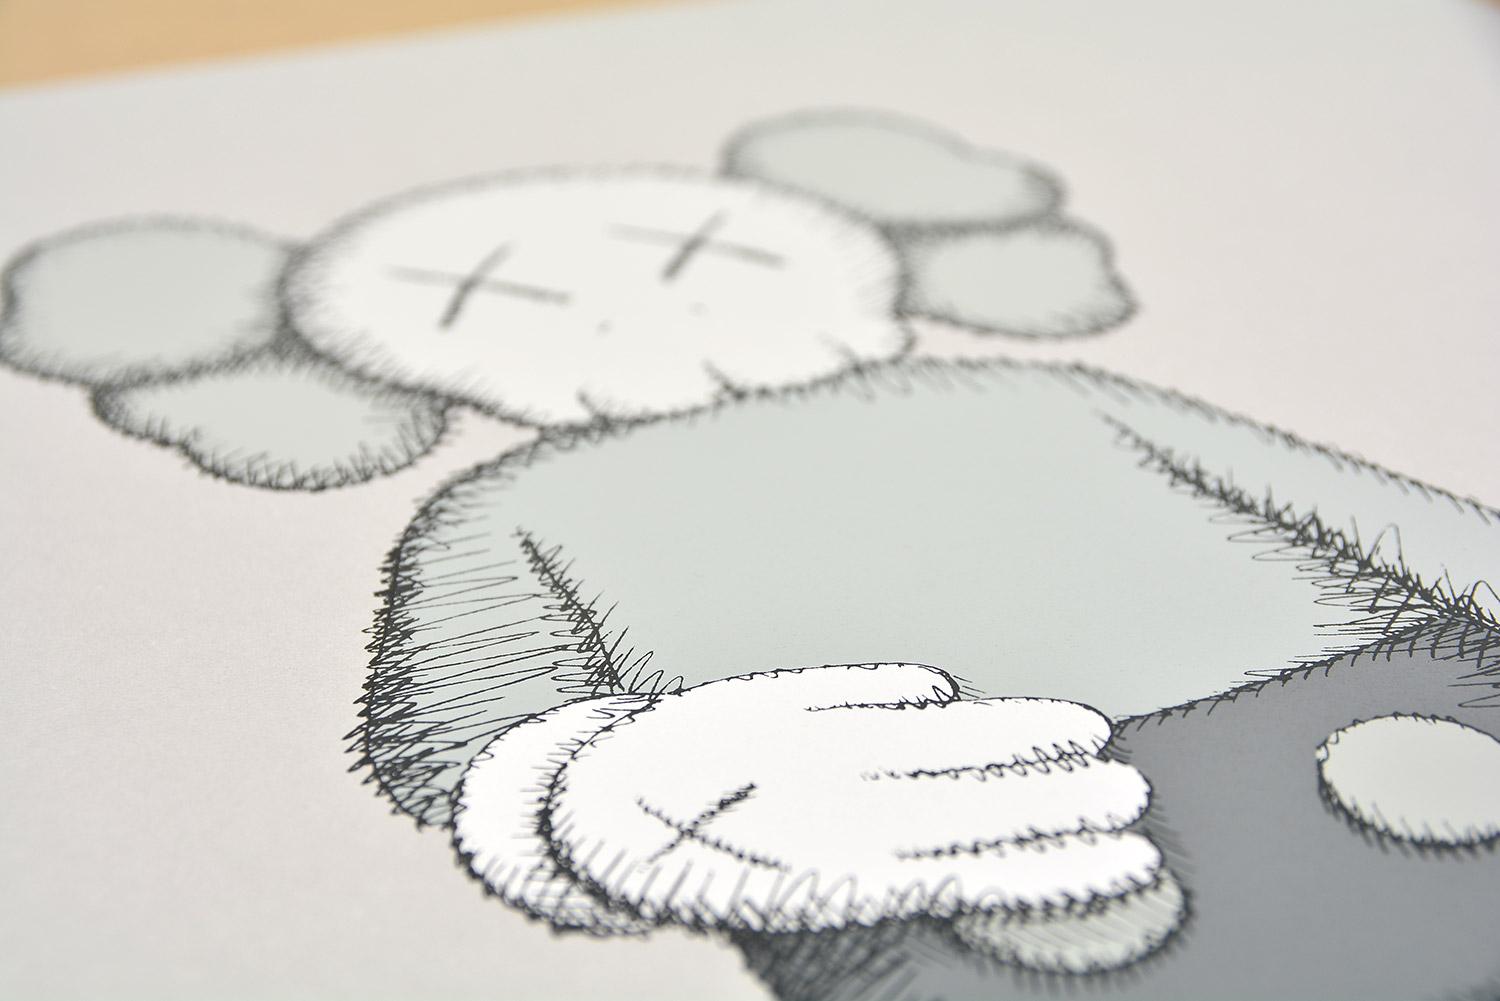 KAWS - SHARE
Date of creation: 2022
Medium: Screen print on Stonehenge gray paper
Edition number: 118/500
Size: 50.8 x 40.6 cm
Condition: In mint conditions, brand new and never framed
Observations: Screen print on Stonehenge gray paper hand signed,